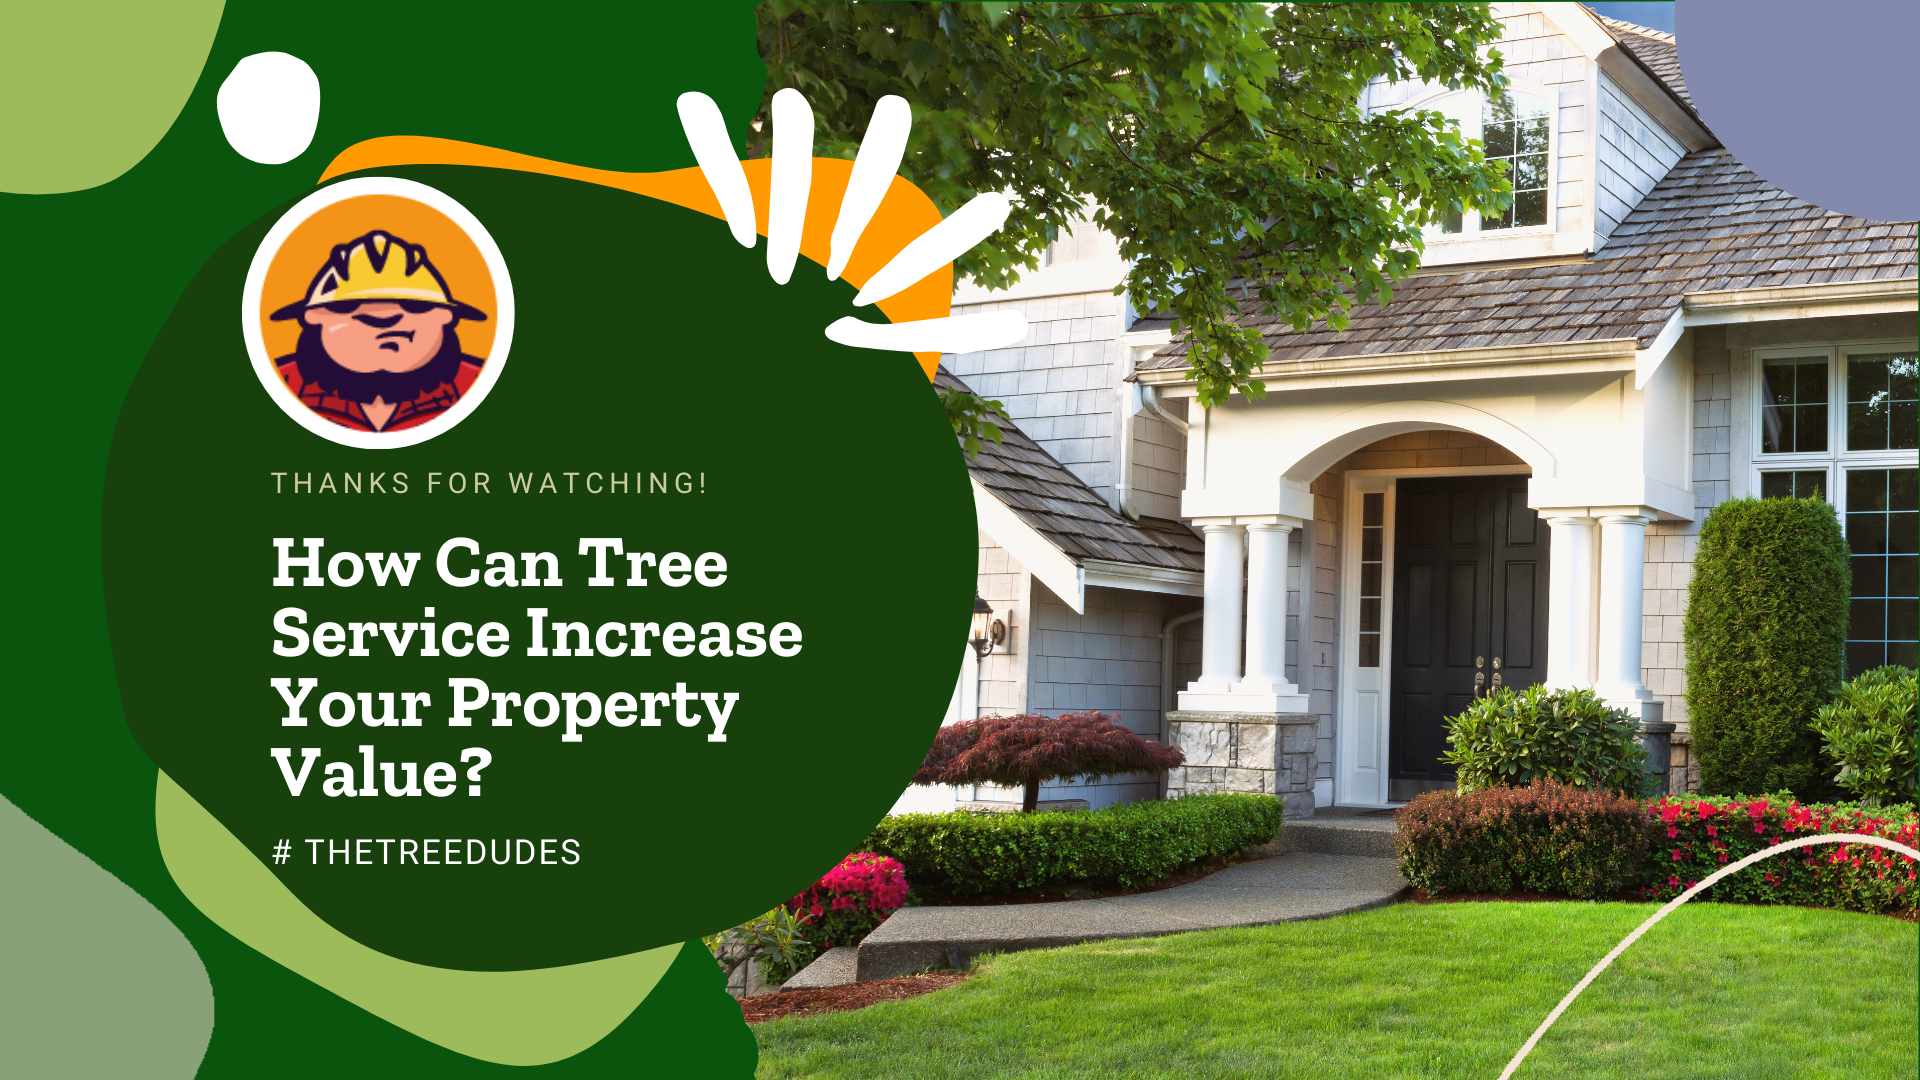 How Can Tree Service Increase Your Property Value